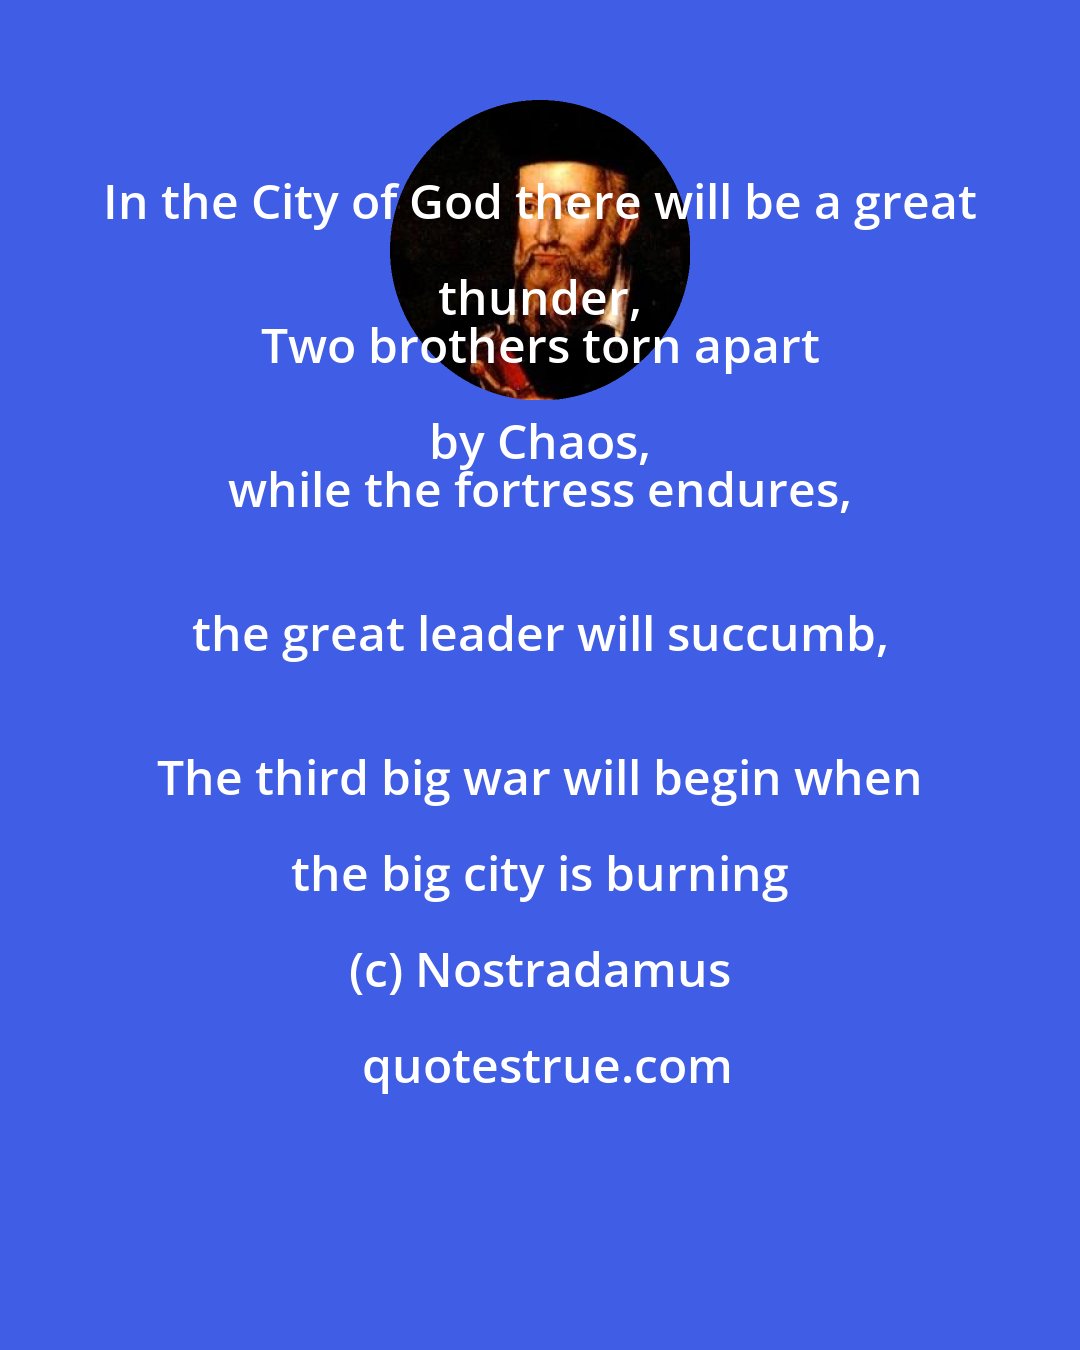 Nostradamus: In the City of God there will be a great thunder, 
 Two brothers torn apart by Chaos, 
 while the fortress endures, 
 the great leader will succumb, 
 The third big war will begin when the big city is burning